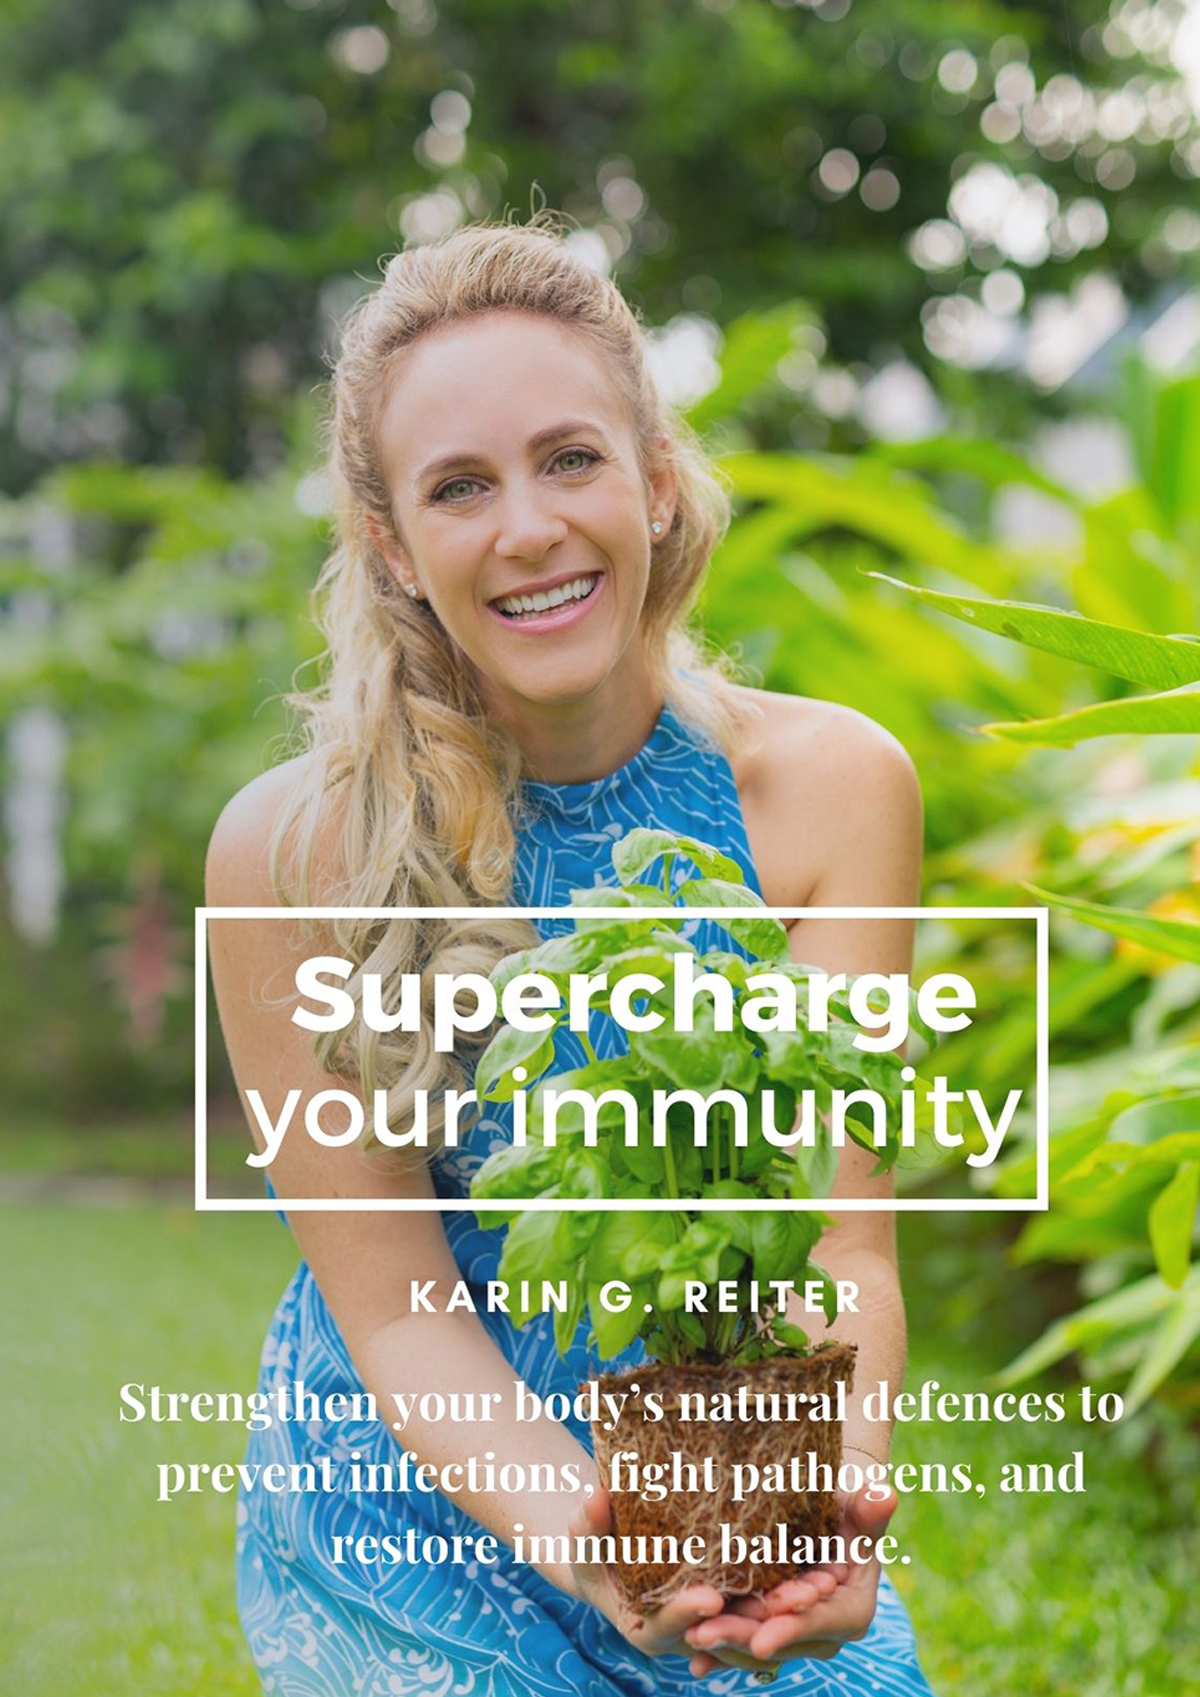 Notes + Recipes to Supercharge your immunity